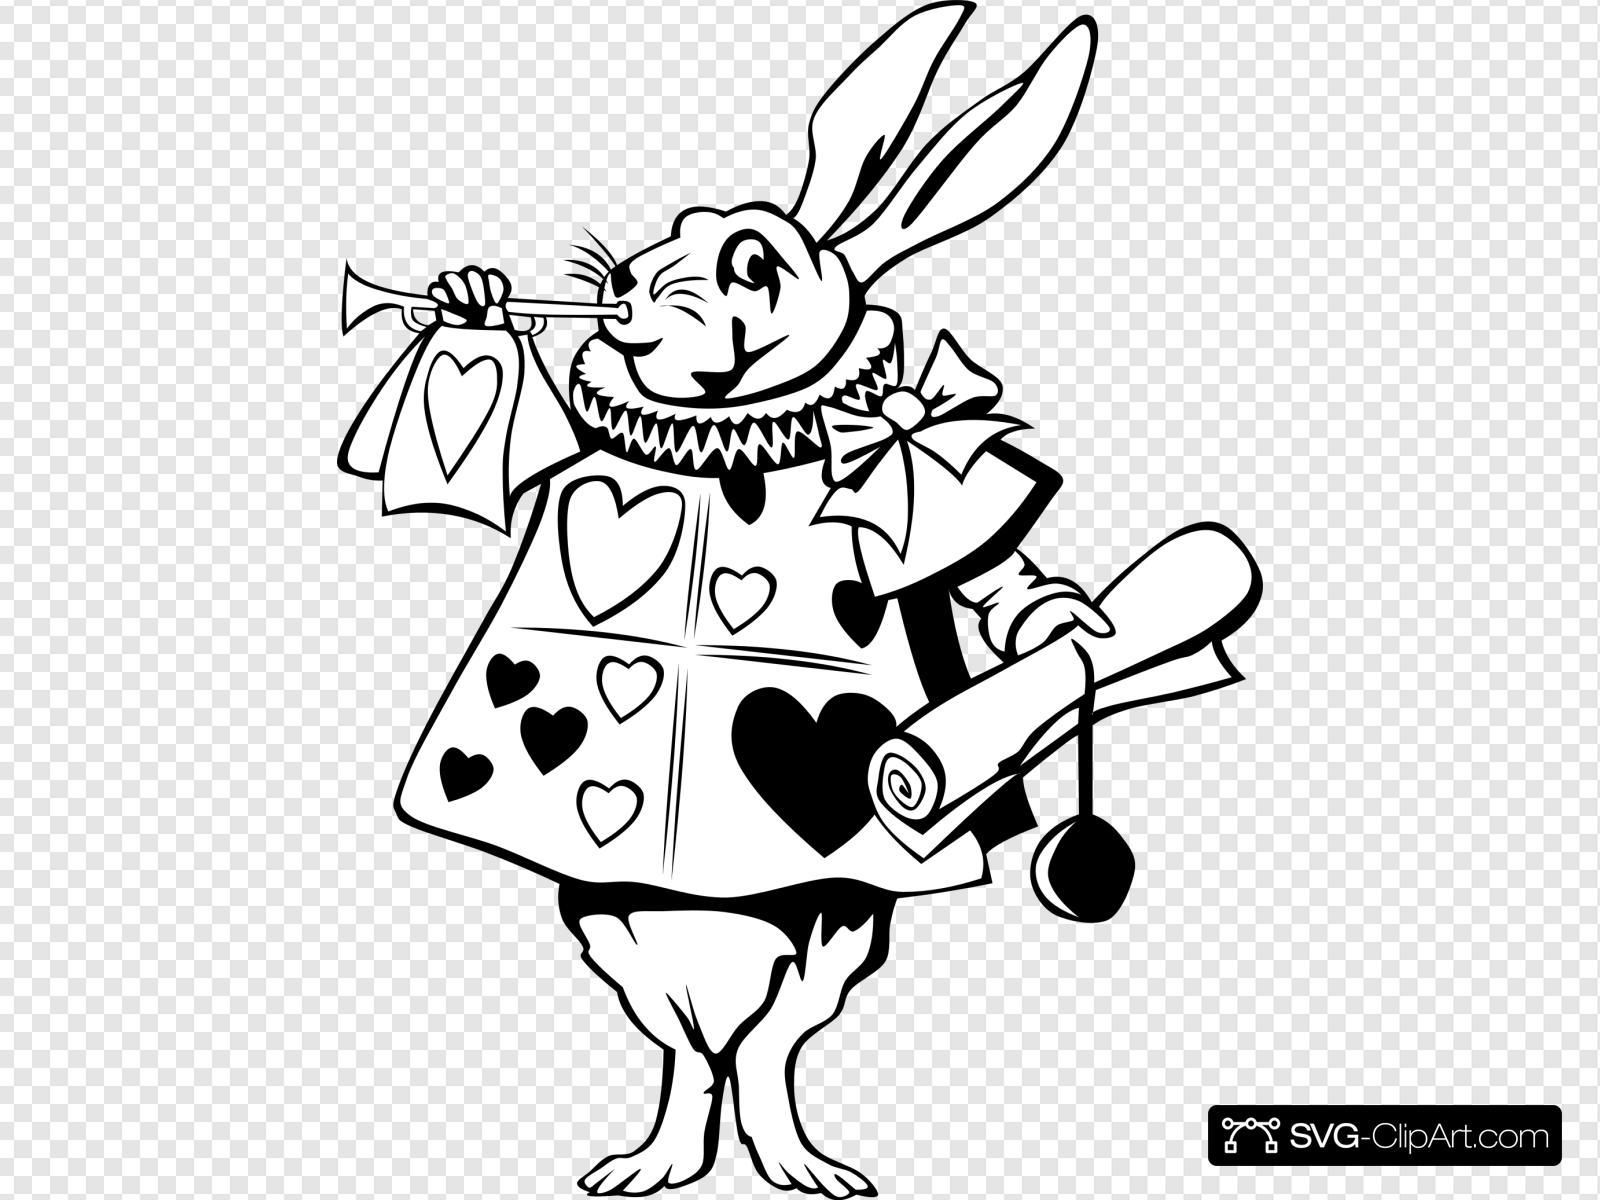 Rabbit From Alice In Wonderland Clip art, Icon and SVG.